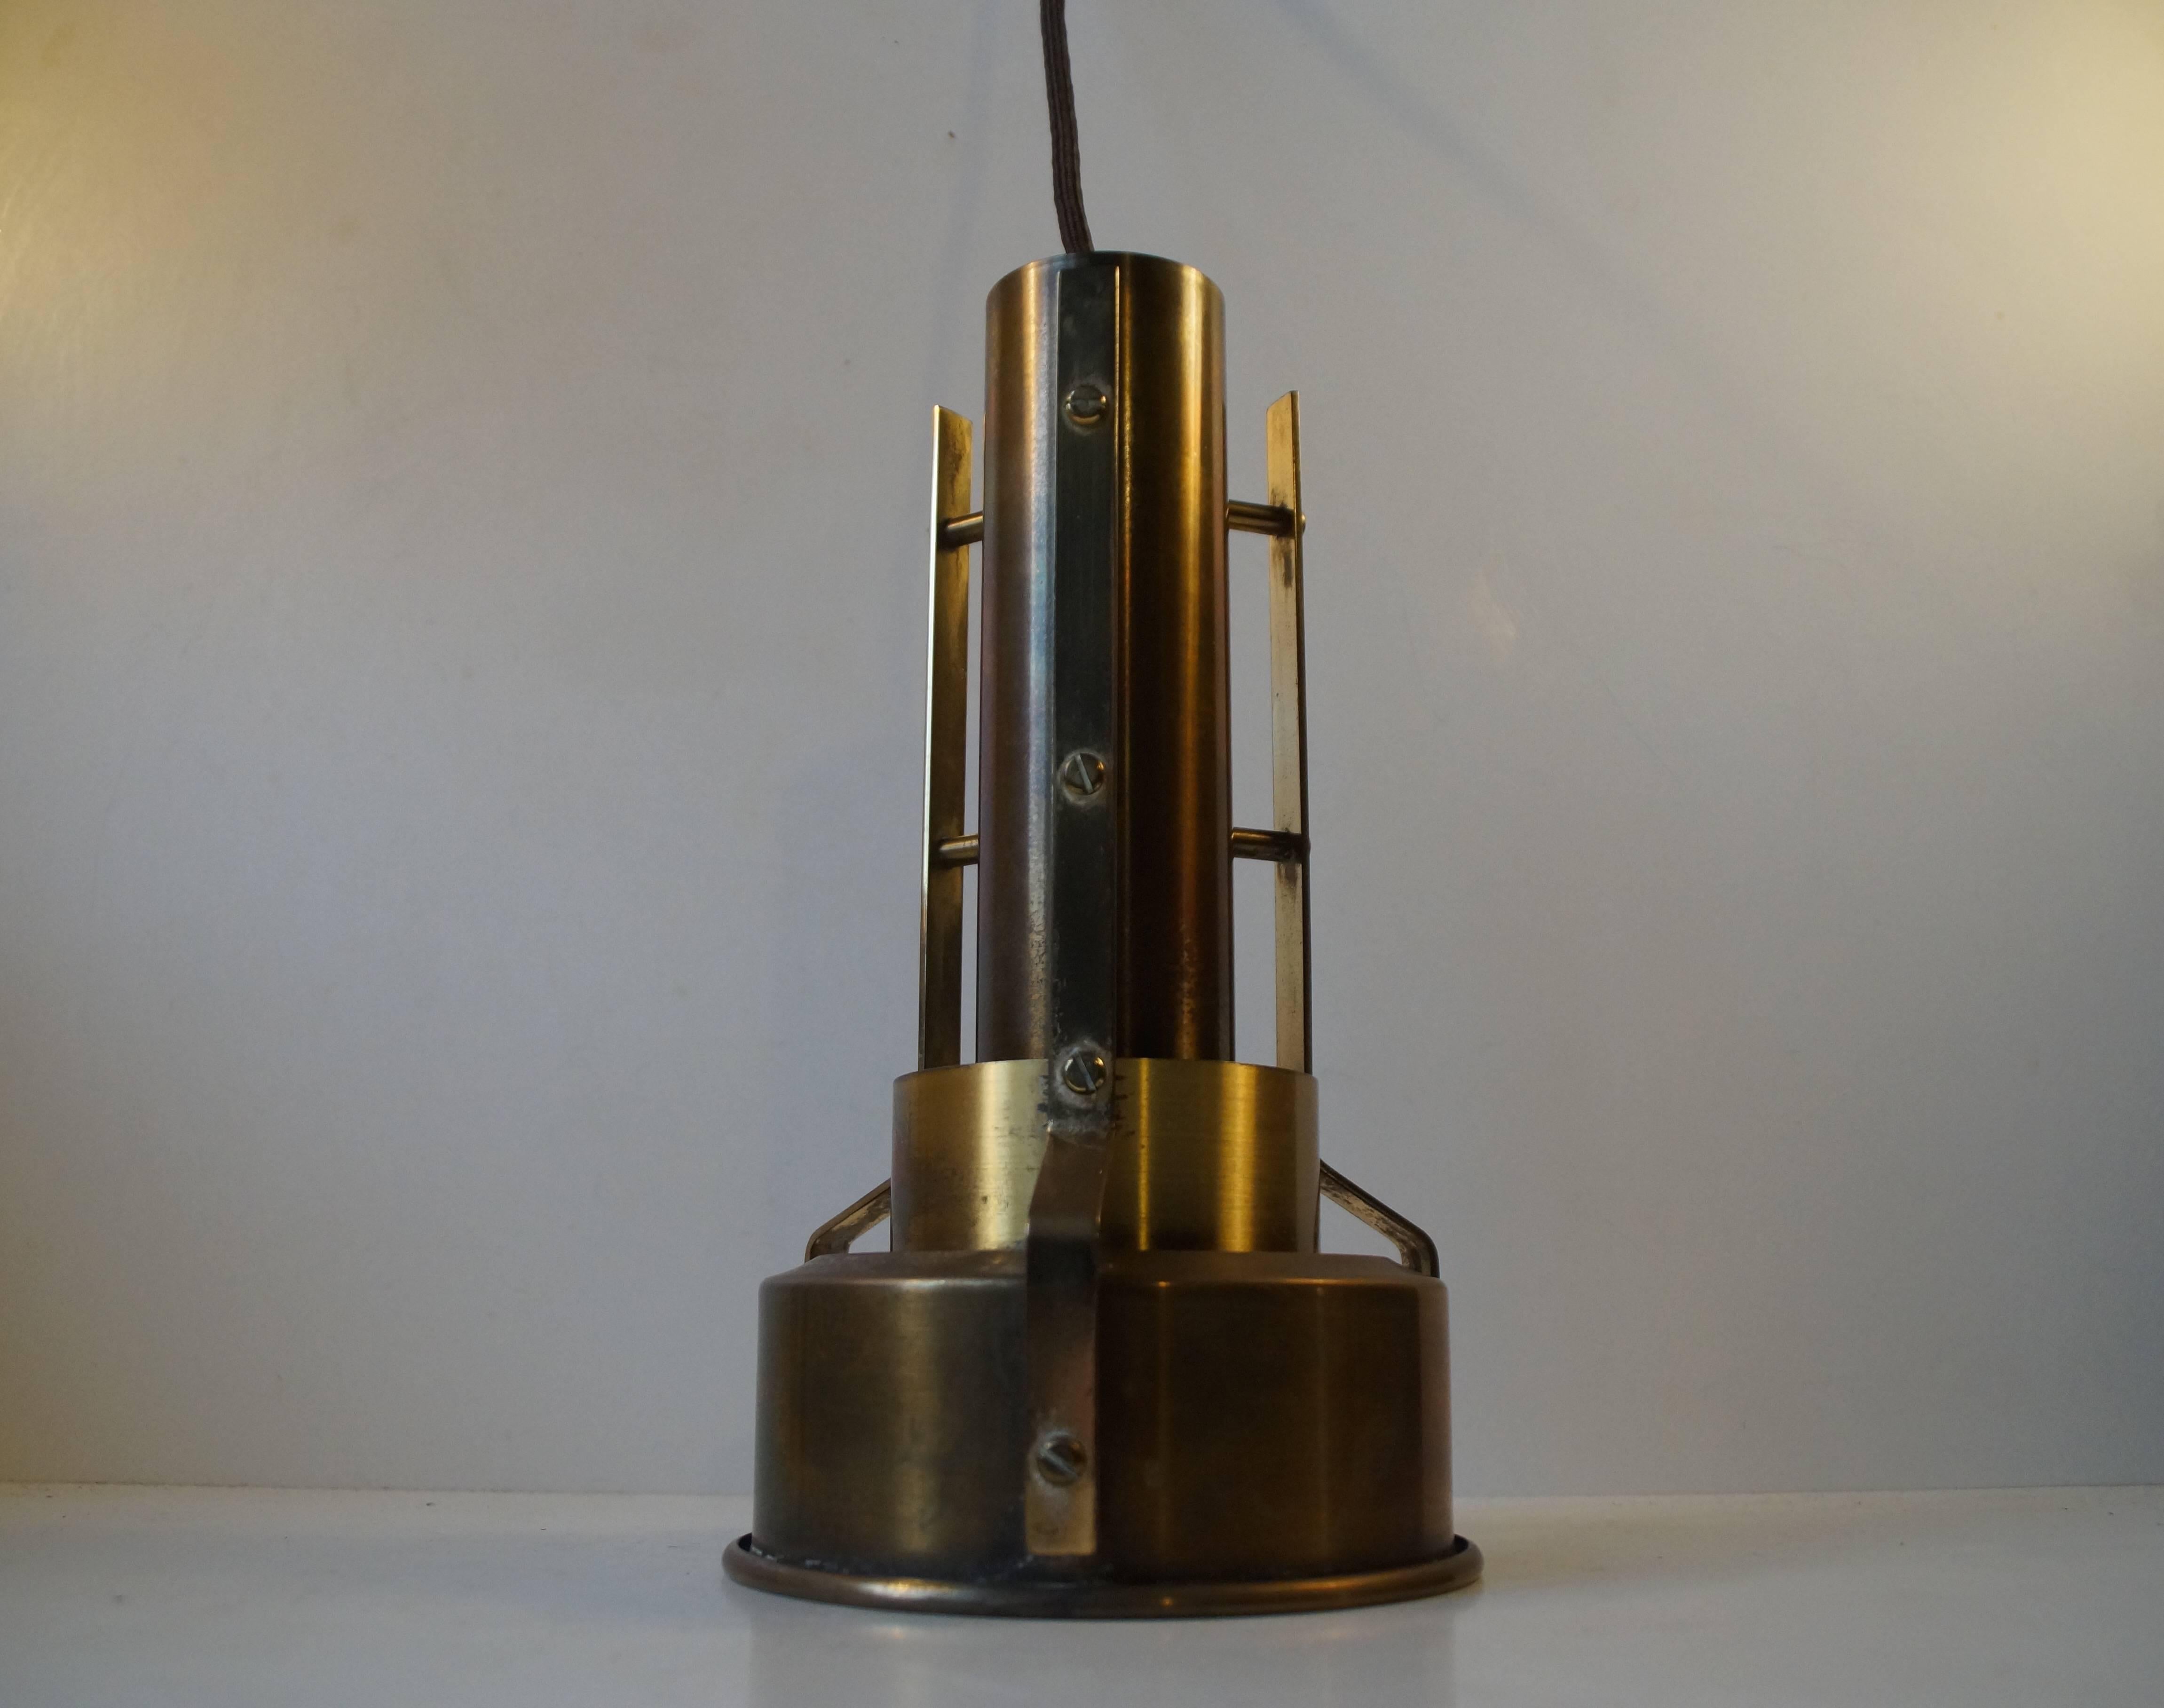 Danish Midcentury Nautical Brass Pendant Light, 1950s In Good Condition For Sale In Esbjerg, DK